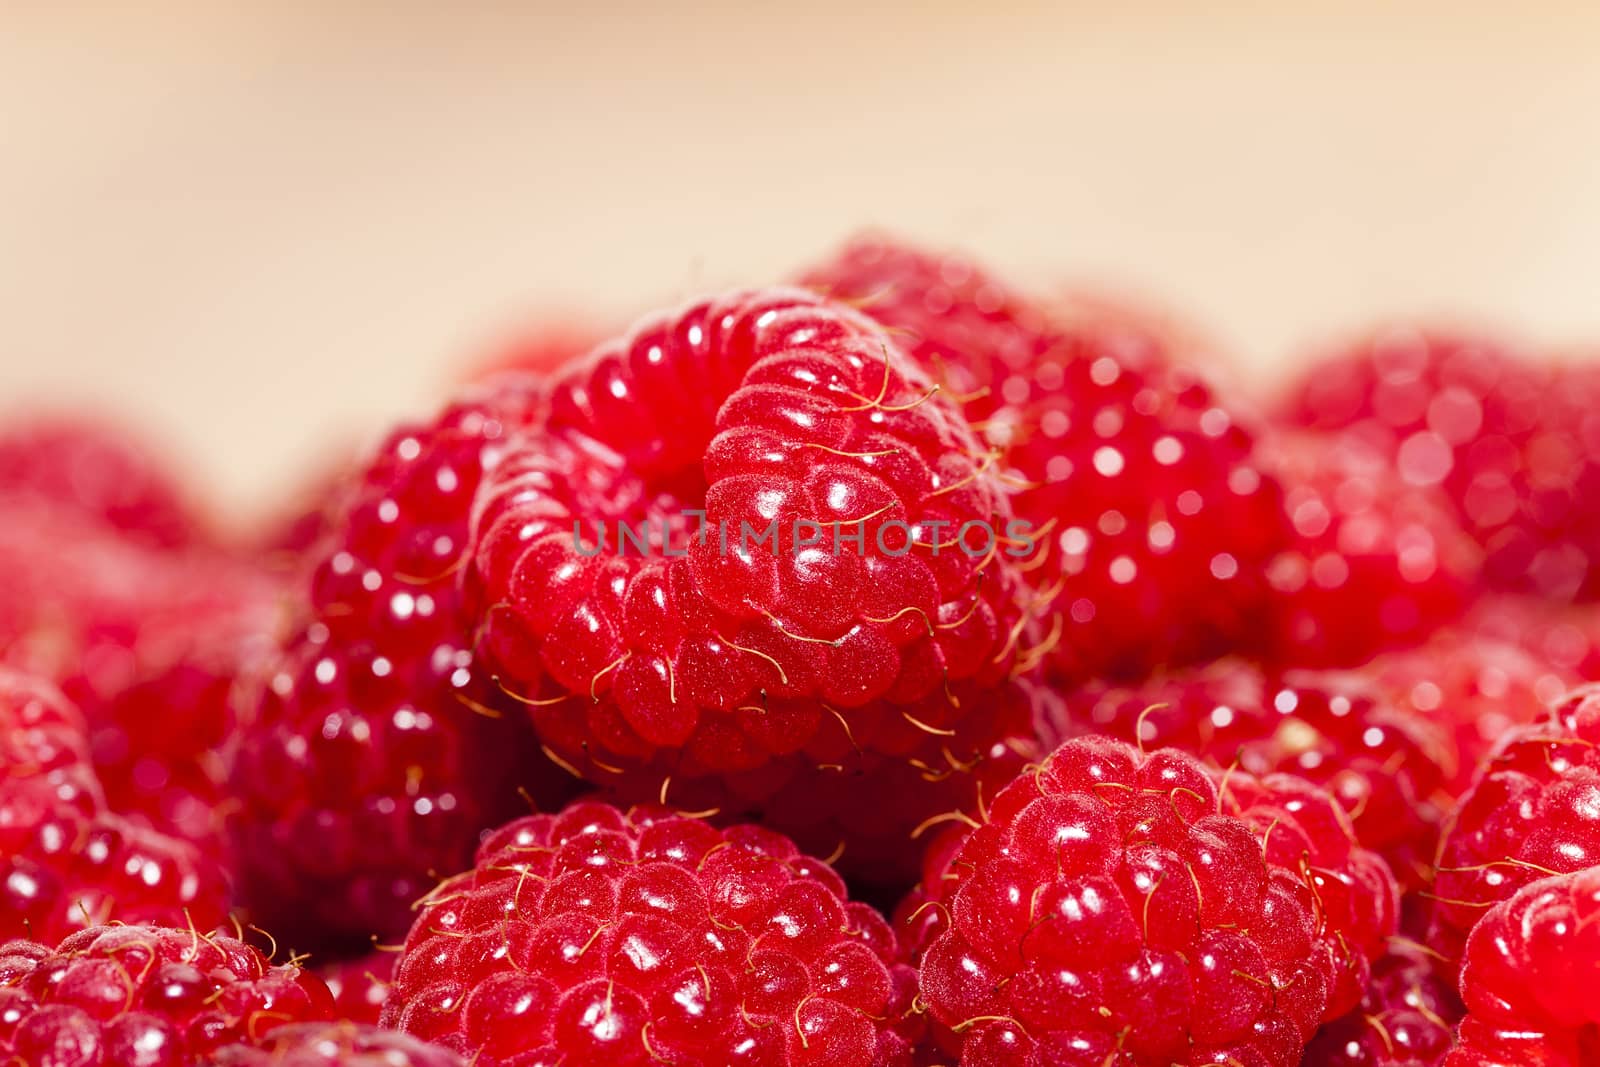   photographed close up ripe red raspberries. food